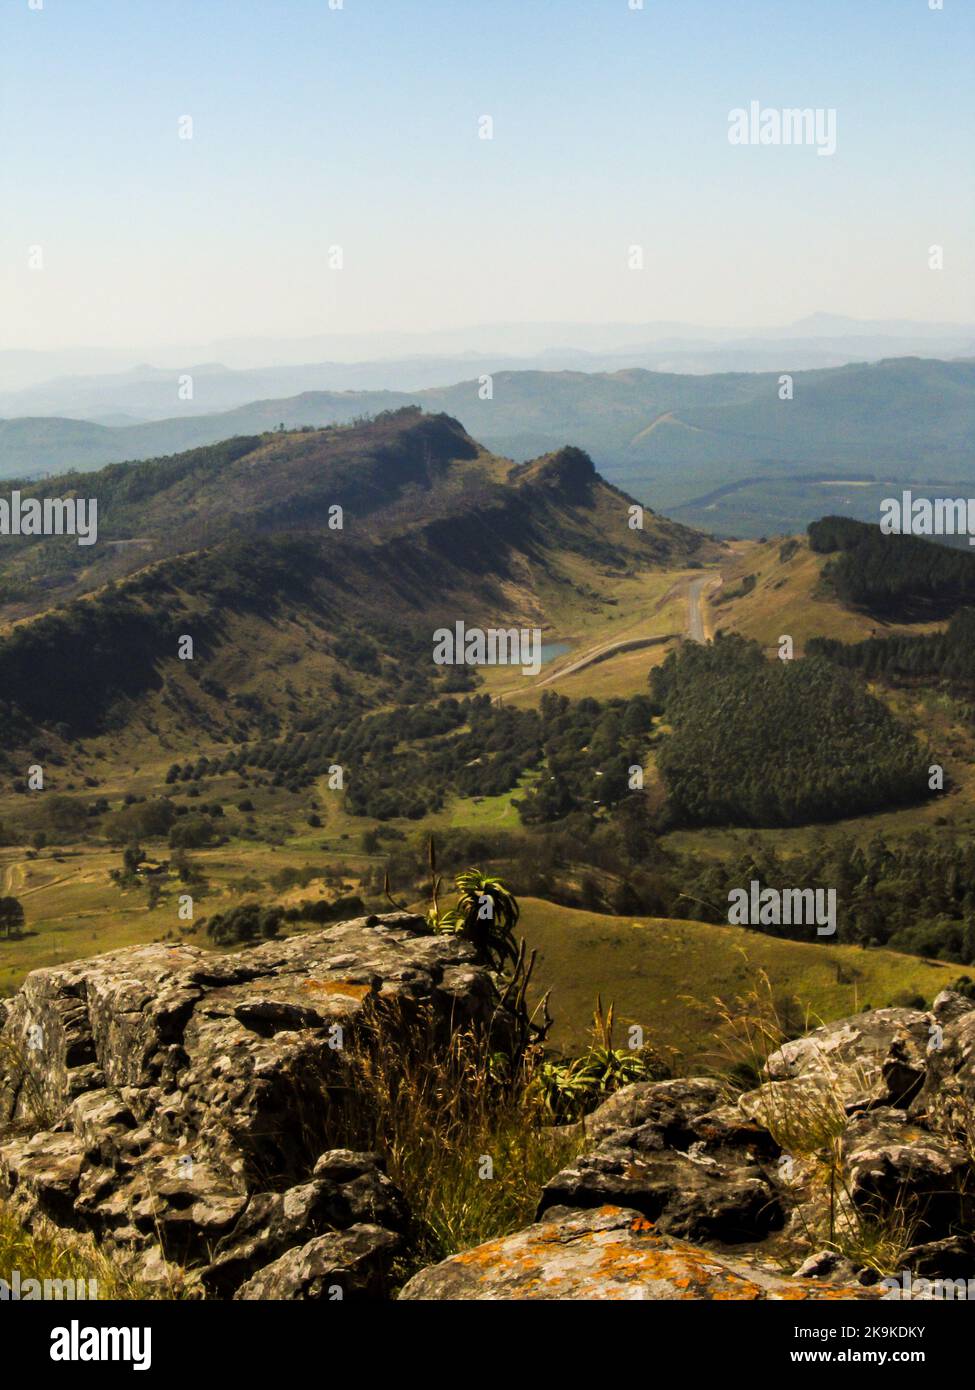 Looking down over the valleys and mountains surrounding Kaapsche Hoop, South Africa Stock Photo